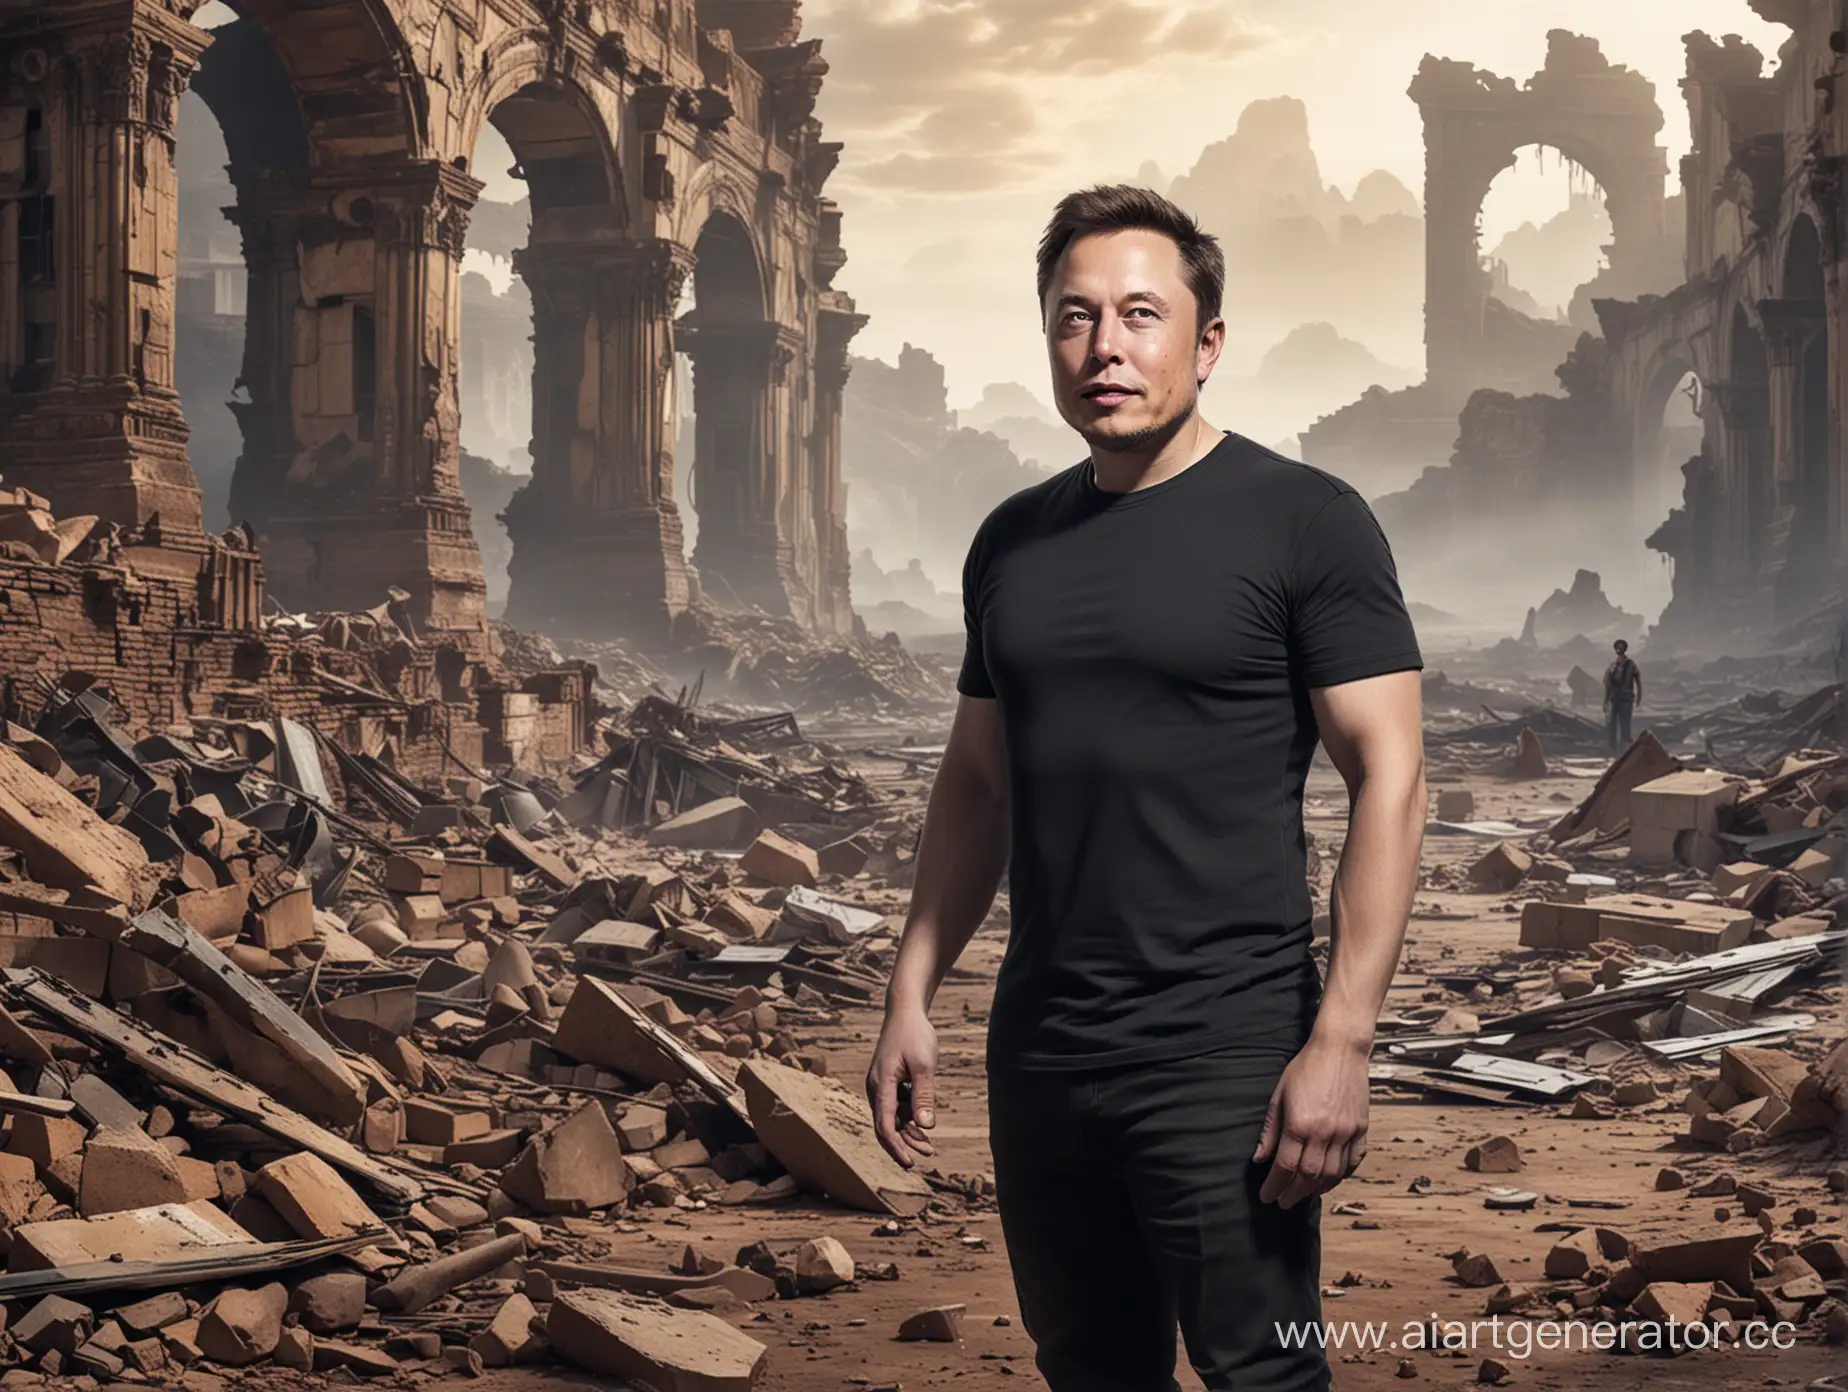 Elon-Musk-Amidst-PostApocalyptic-Ruins-Visionary-Explorer-Confronts-the-Future